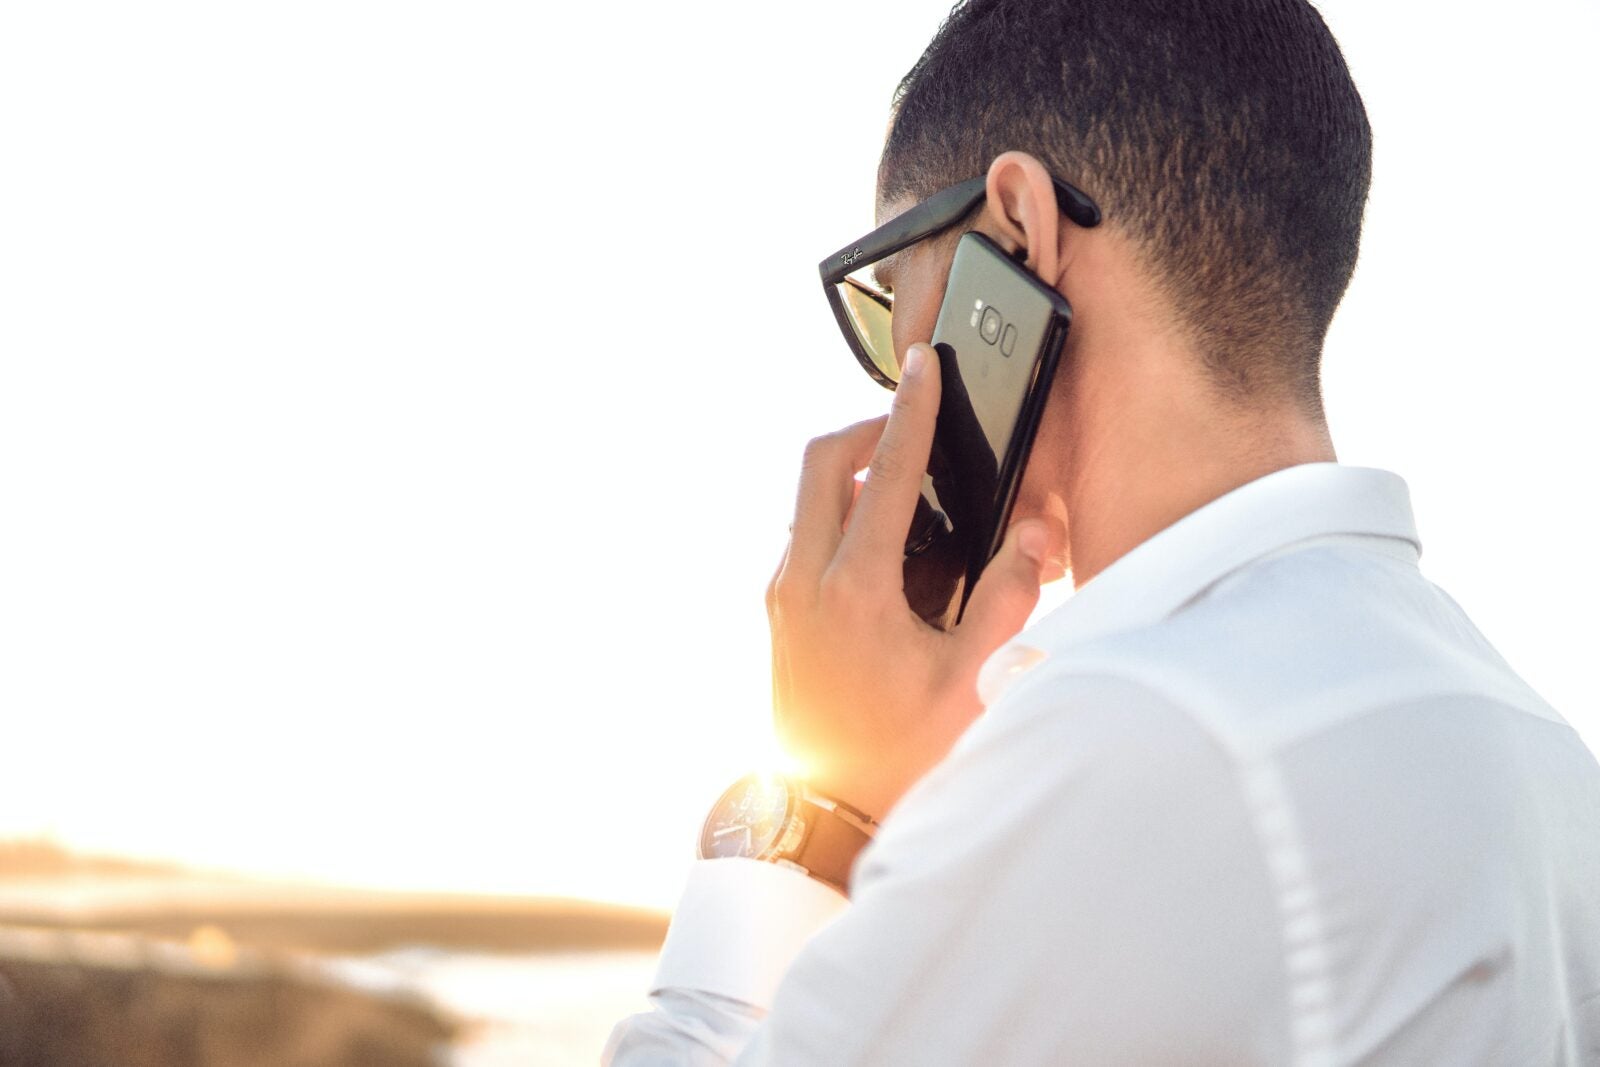 A man wearing sunglasses and a white work shirt, with his phone held to his ear.